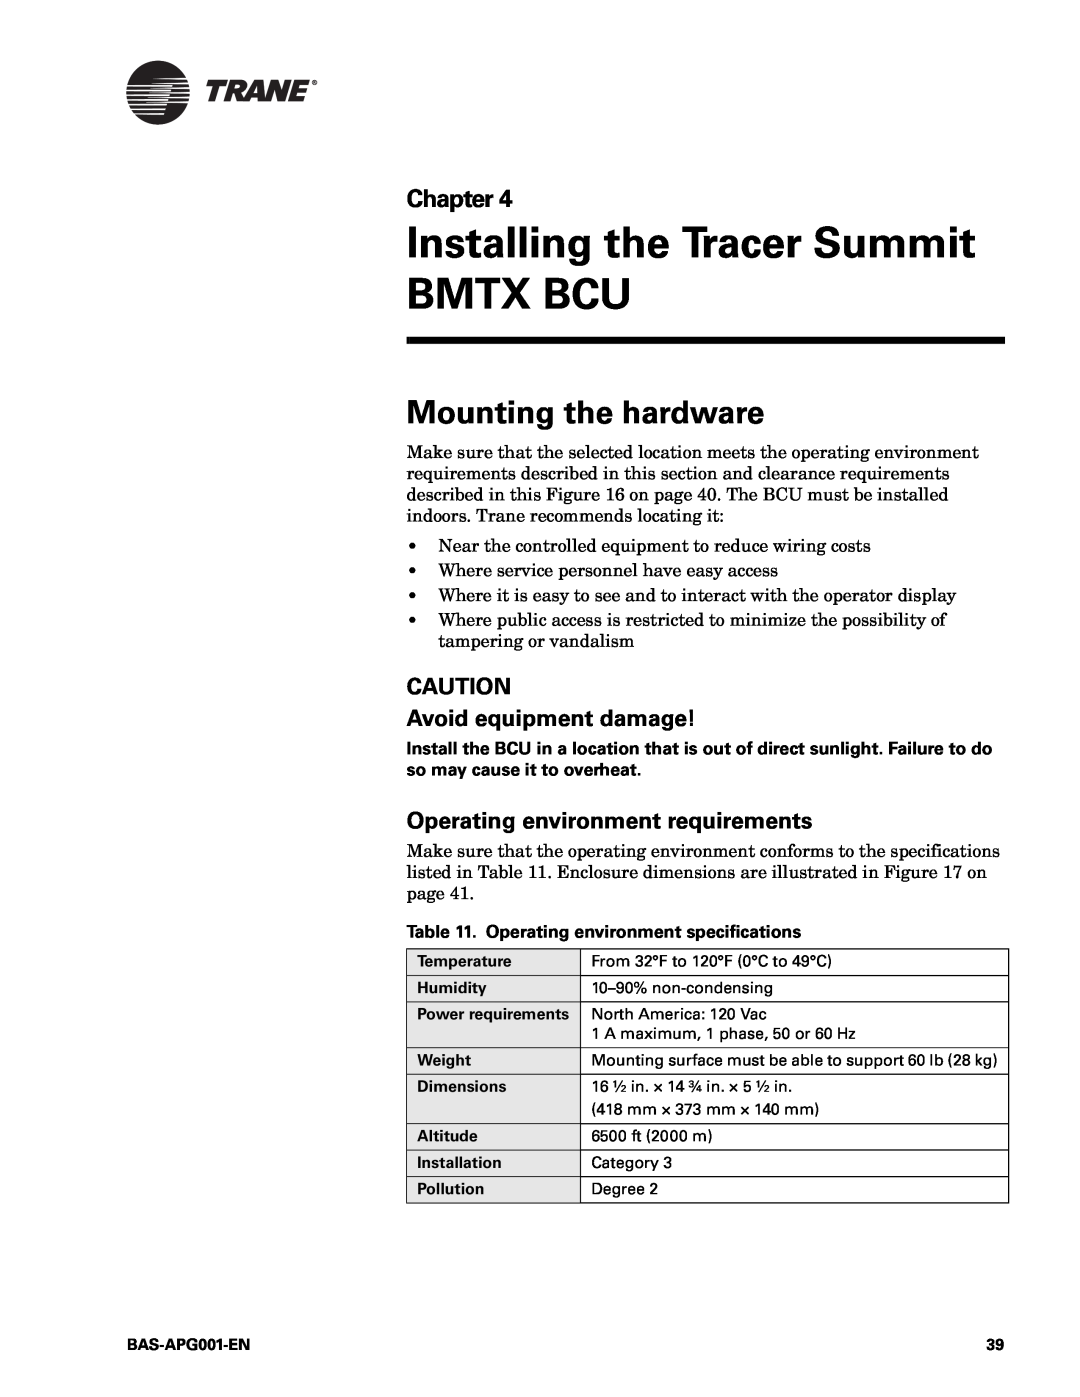 Trane Engineered Smoke Control System for Tracer Summit manual Installing the Tracer Summit BMTX BCU, Mounting the hardware 